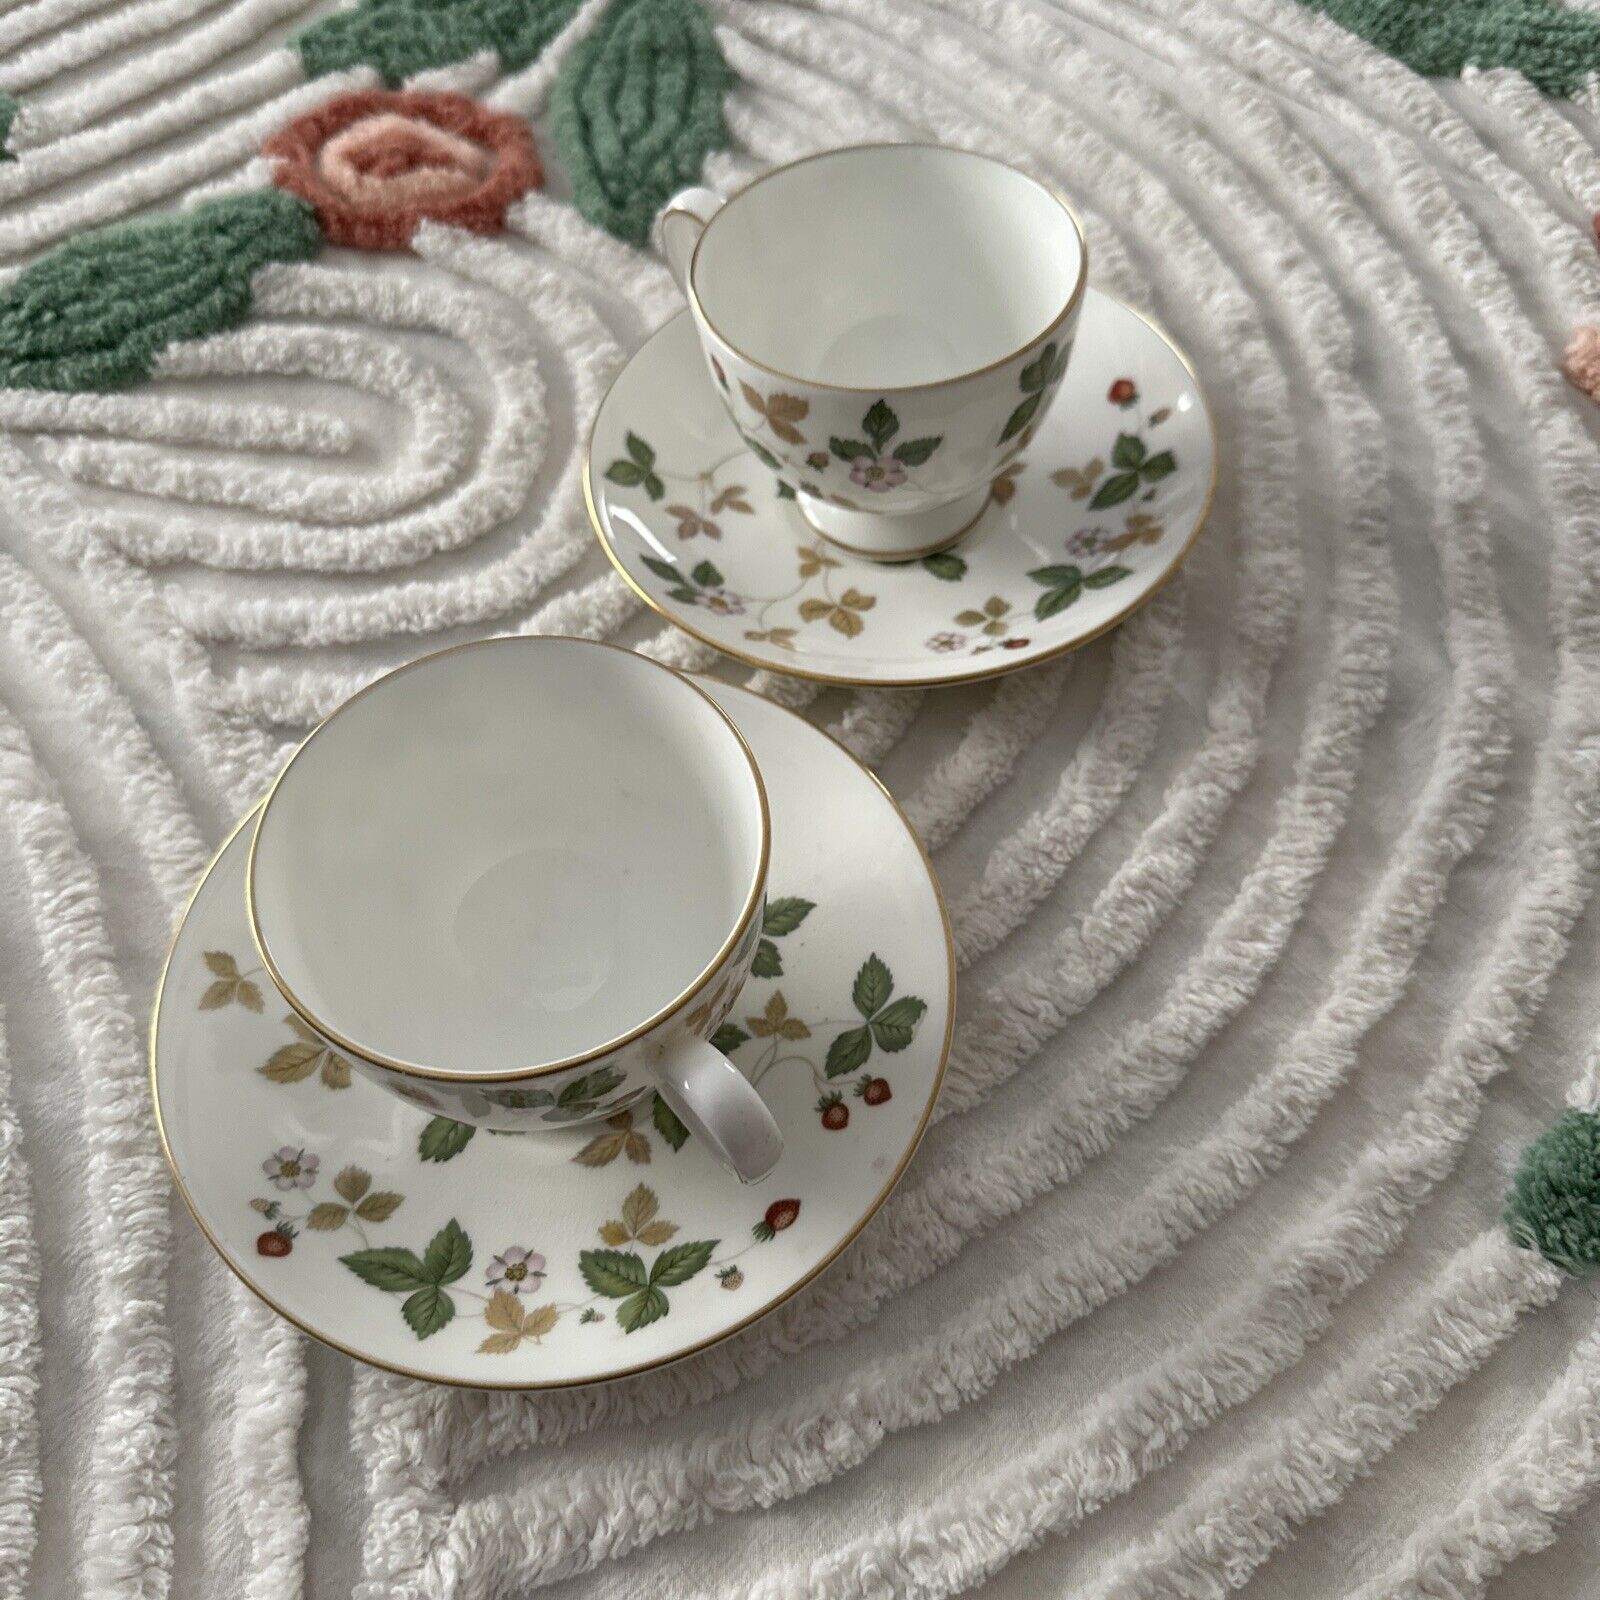 2 Wedgwood England Bone China Wild Strawberry Pattern Footed Cup & Saucer Sets